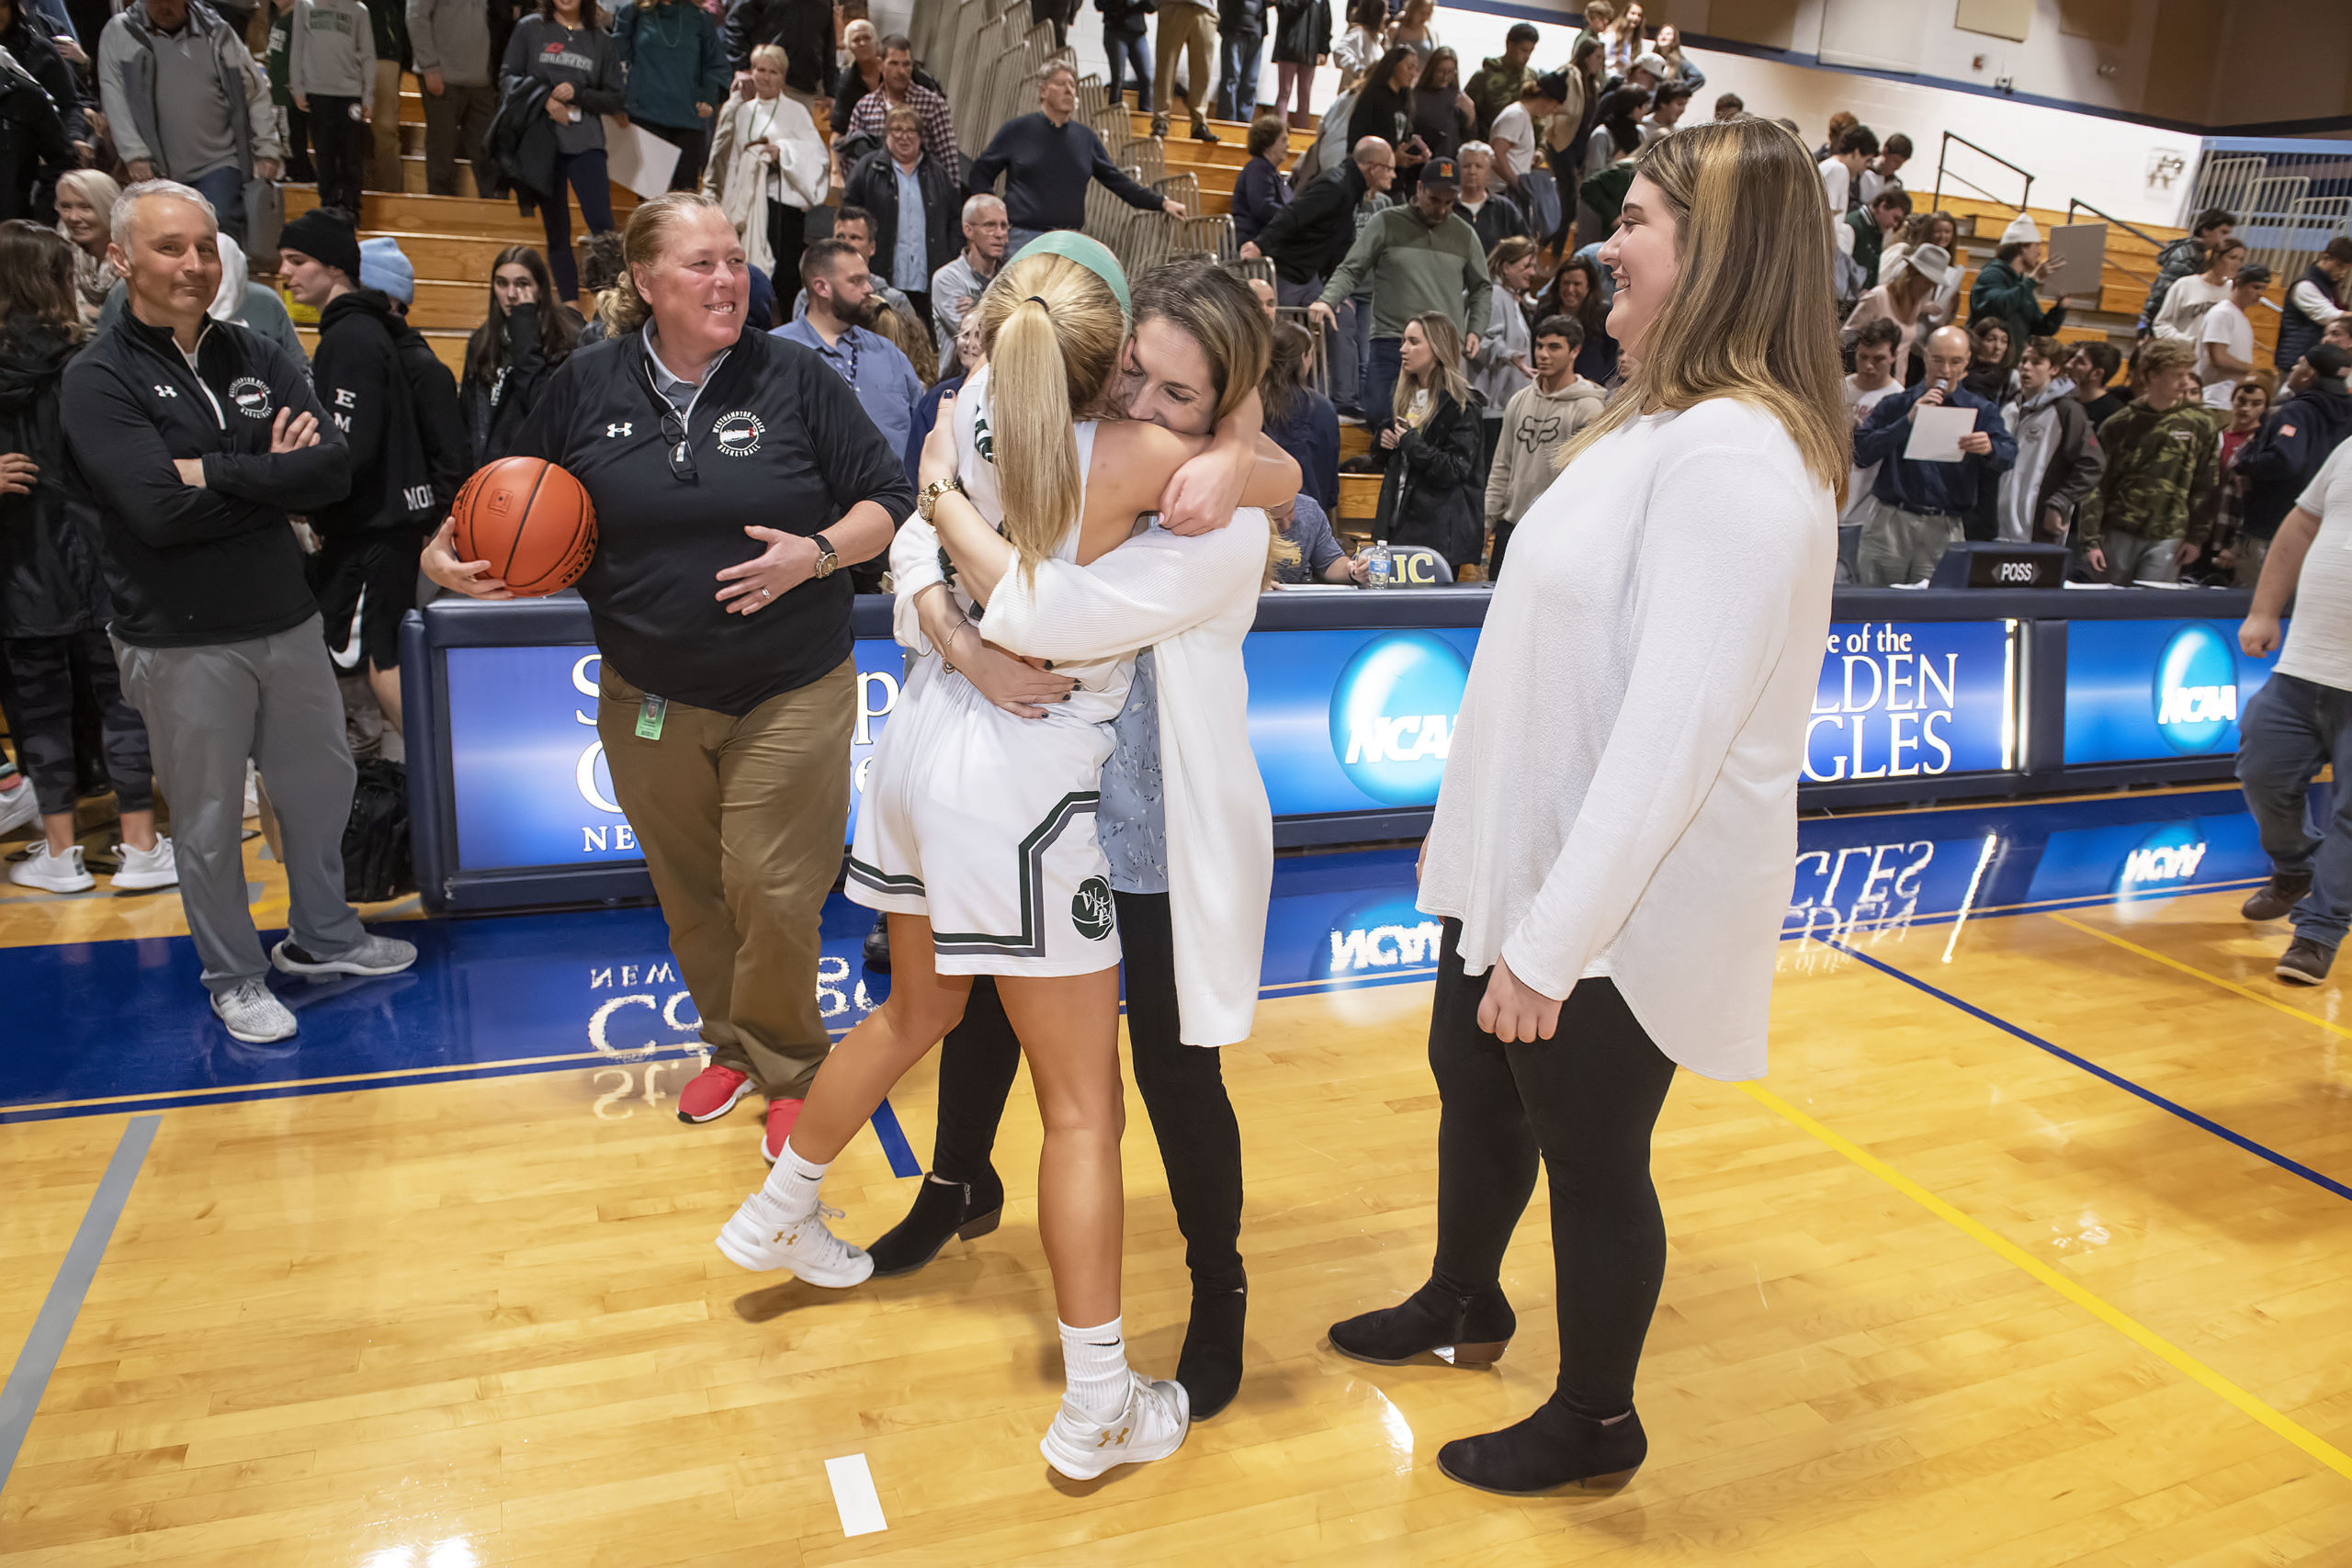 Westhampton Beach senior Isabelle Smith and head coach Katie Peters embrace each other after a hard fought victory for the county title on Tuesday night.